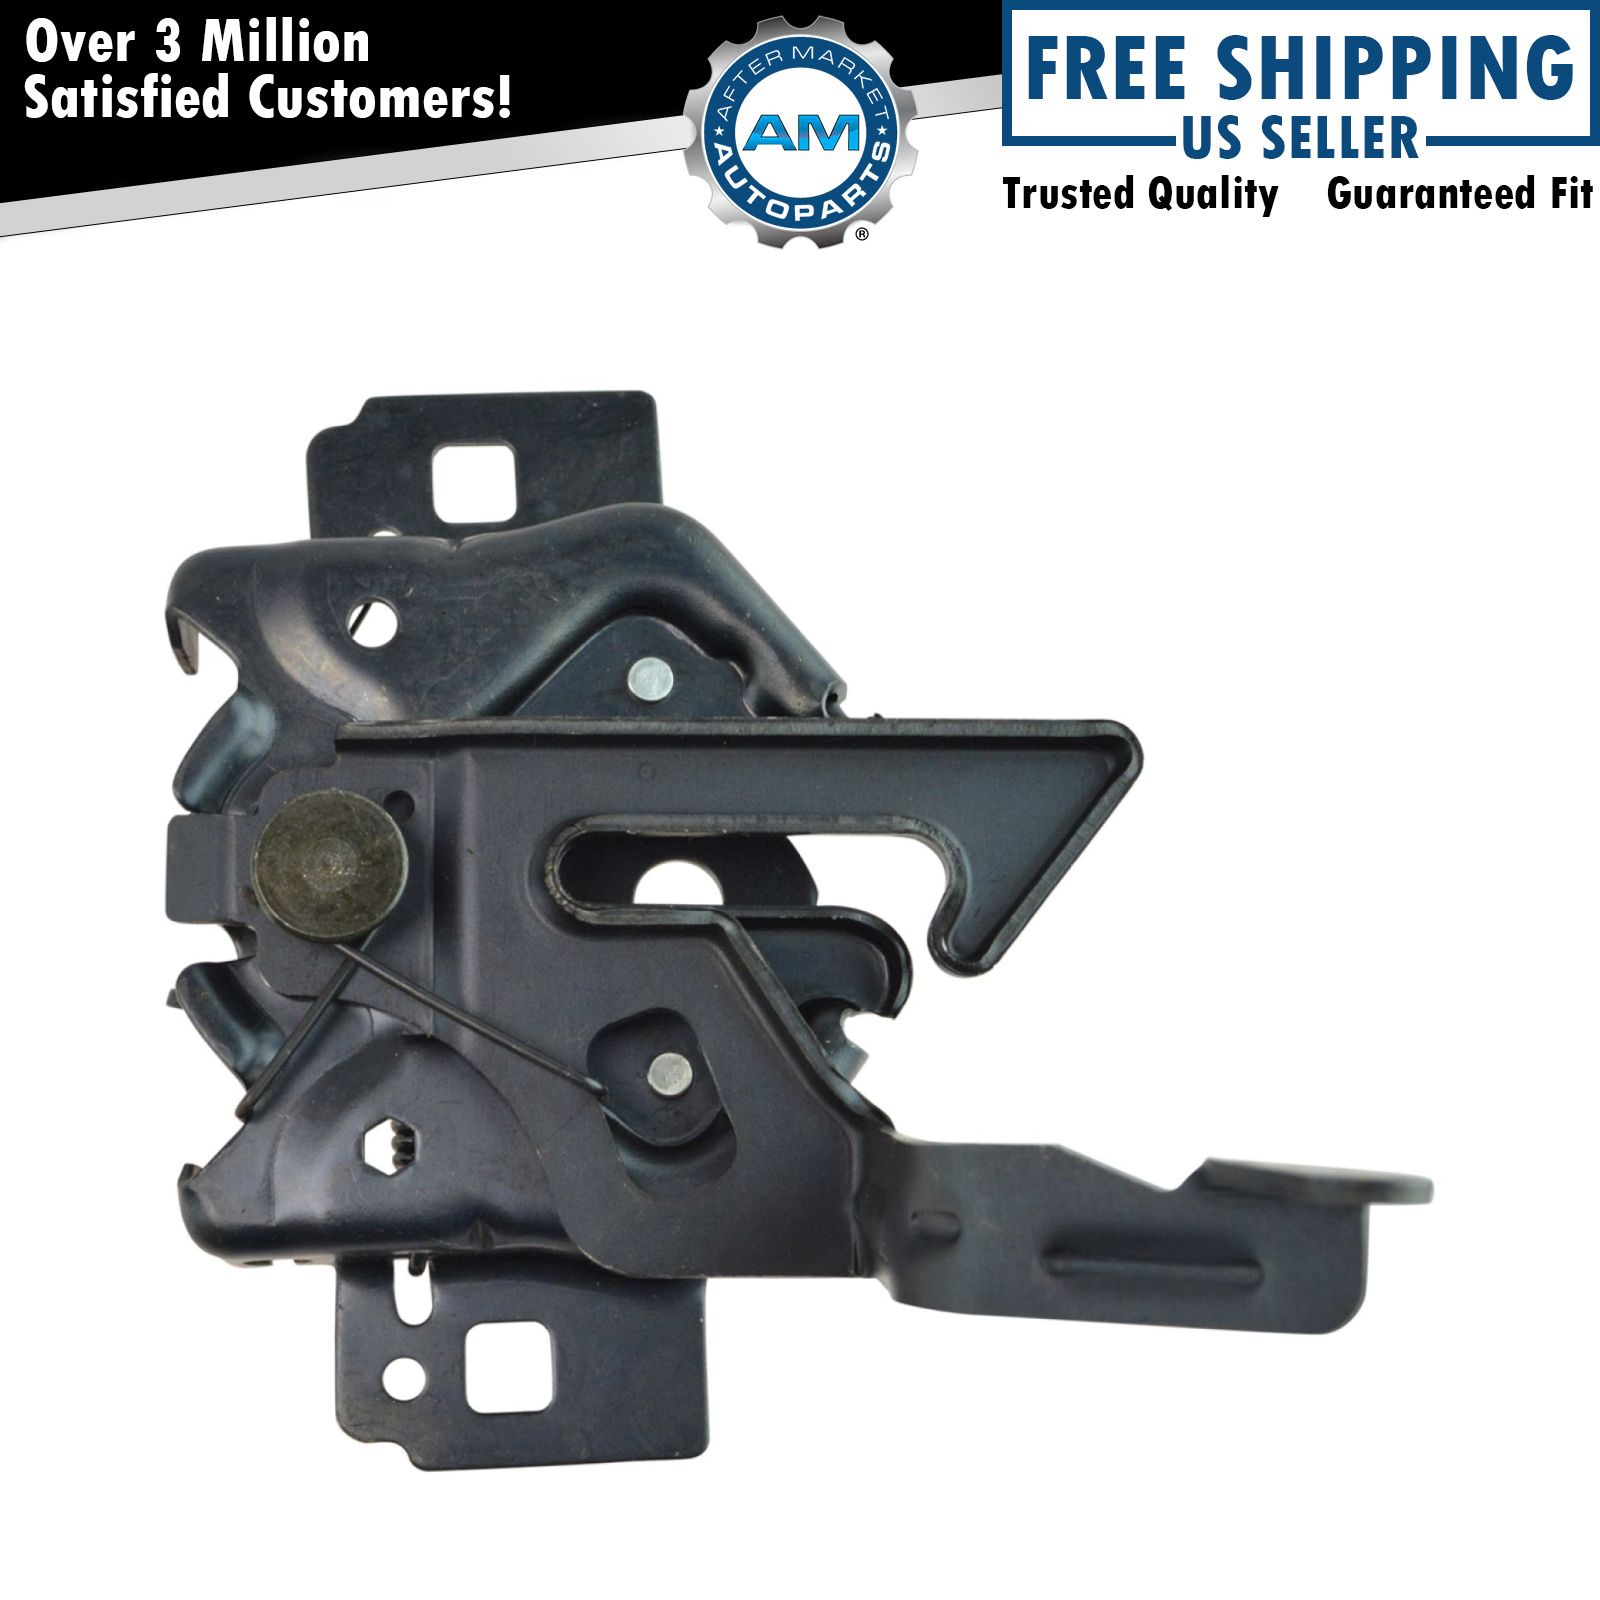 Hood Latch Lock for Ford Expedition F150 F250 Pickup Truck Brand New